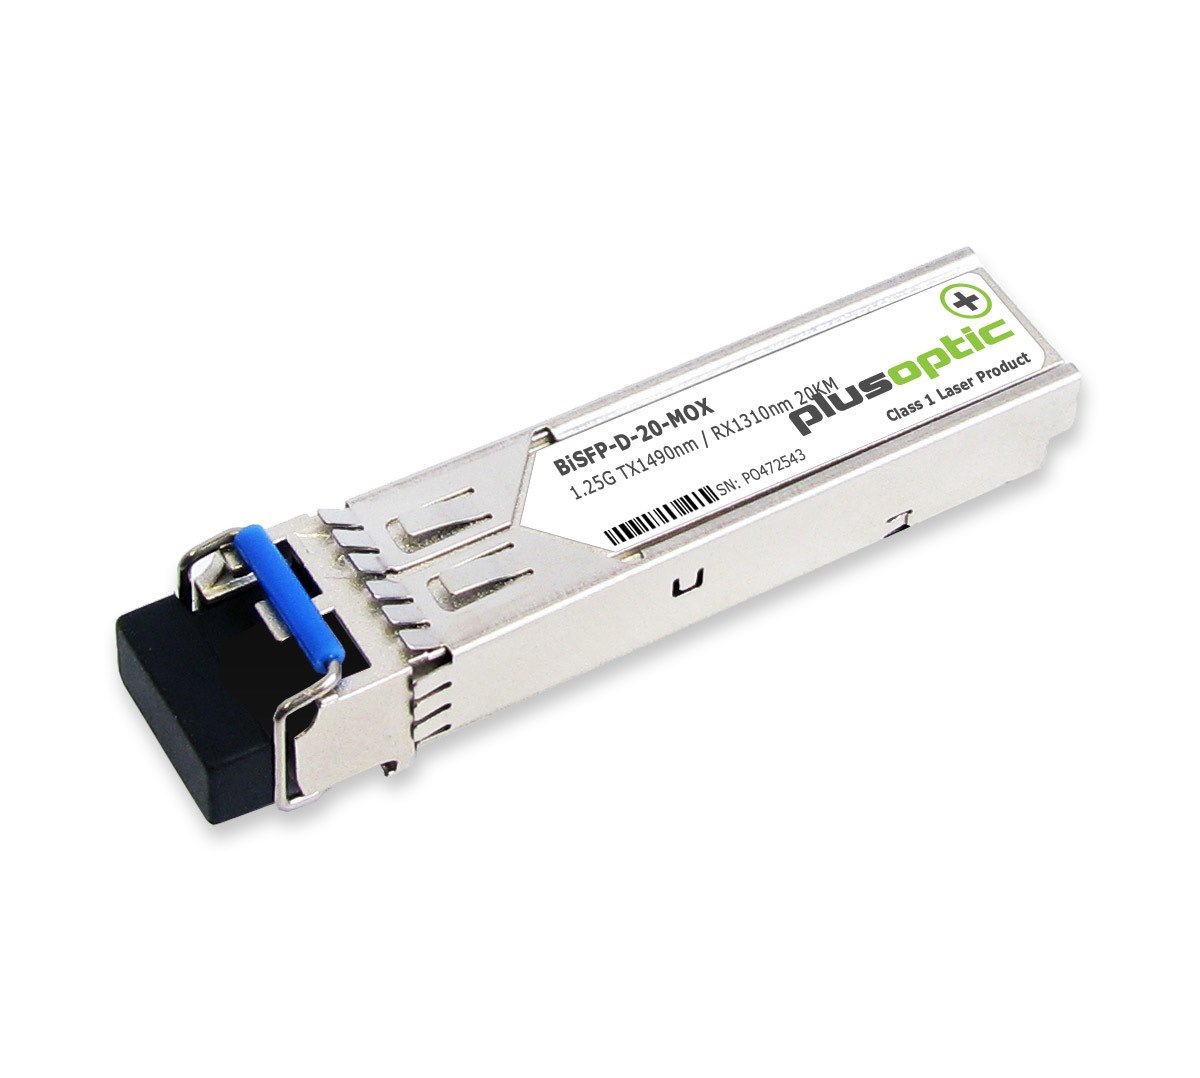 PlusOptic Moxa Compatible 1.25G, BiDi SFP, TX1490nm / RX1310nm, 20KM Transceiver, LC Connector For SMF With Dom | PlusOptic Bisfp-D-20-Mox